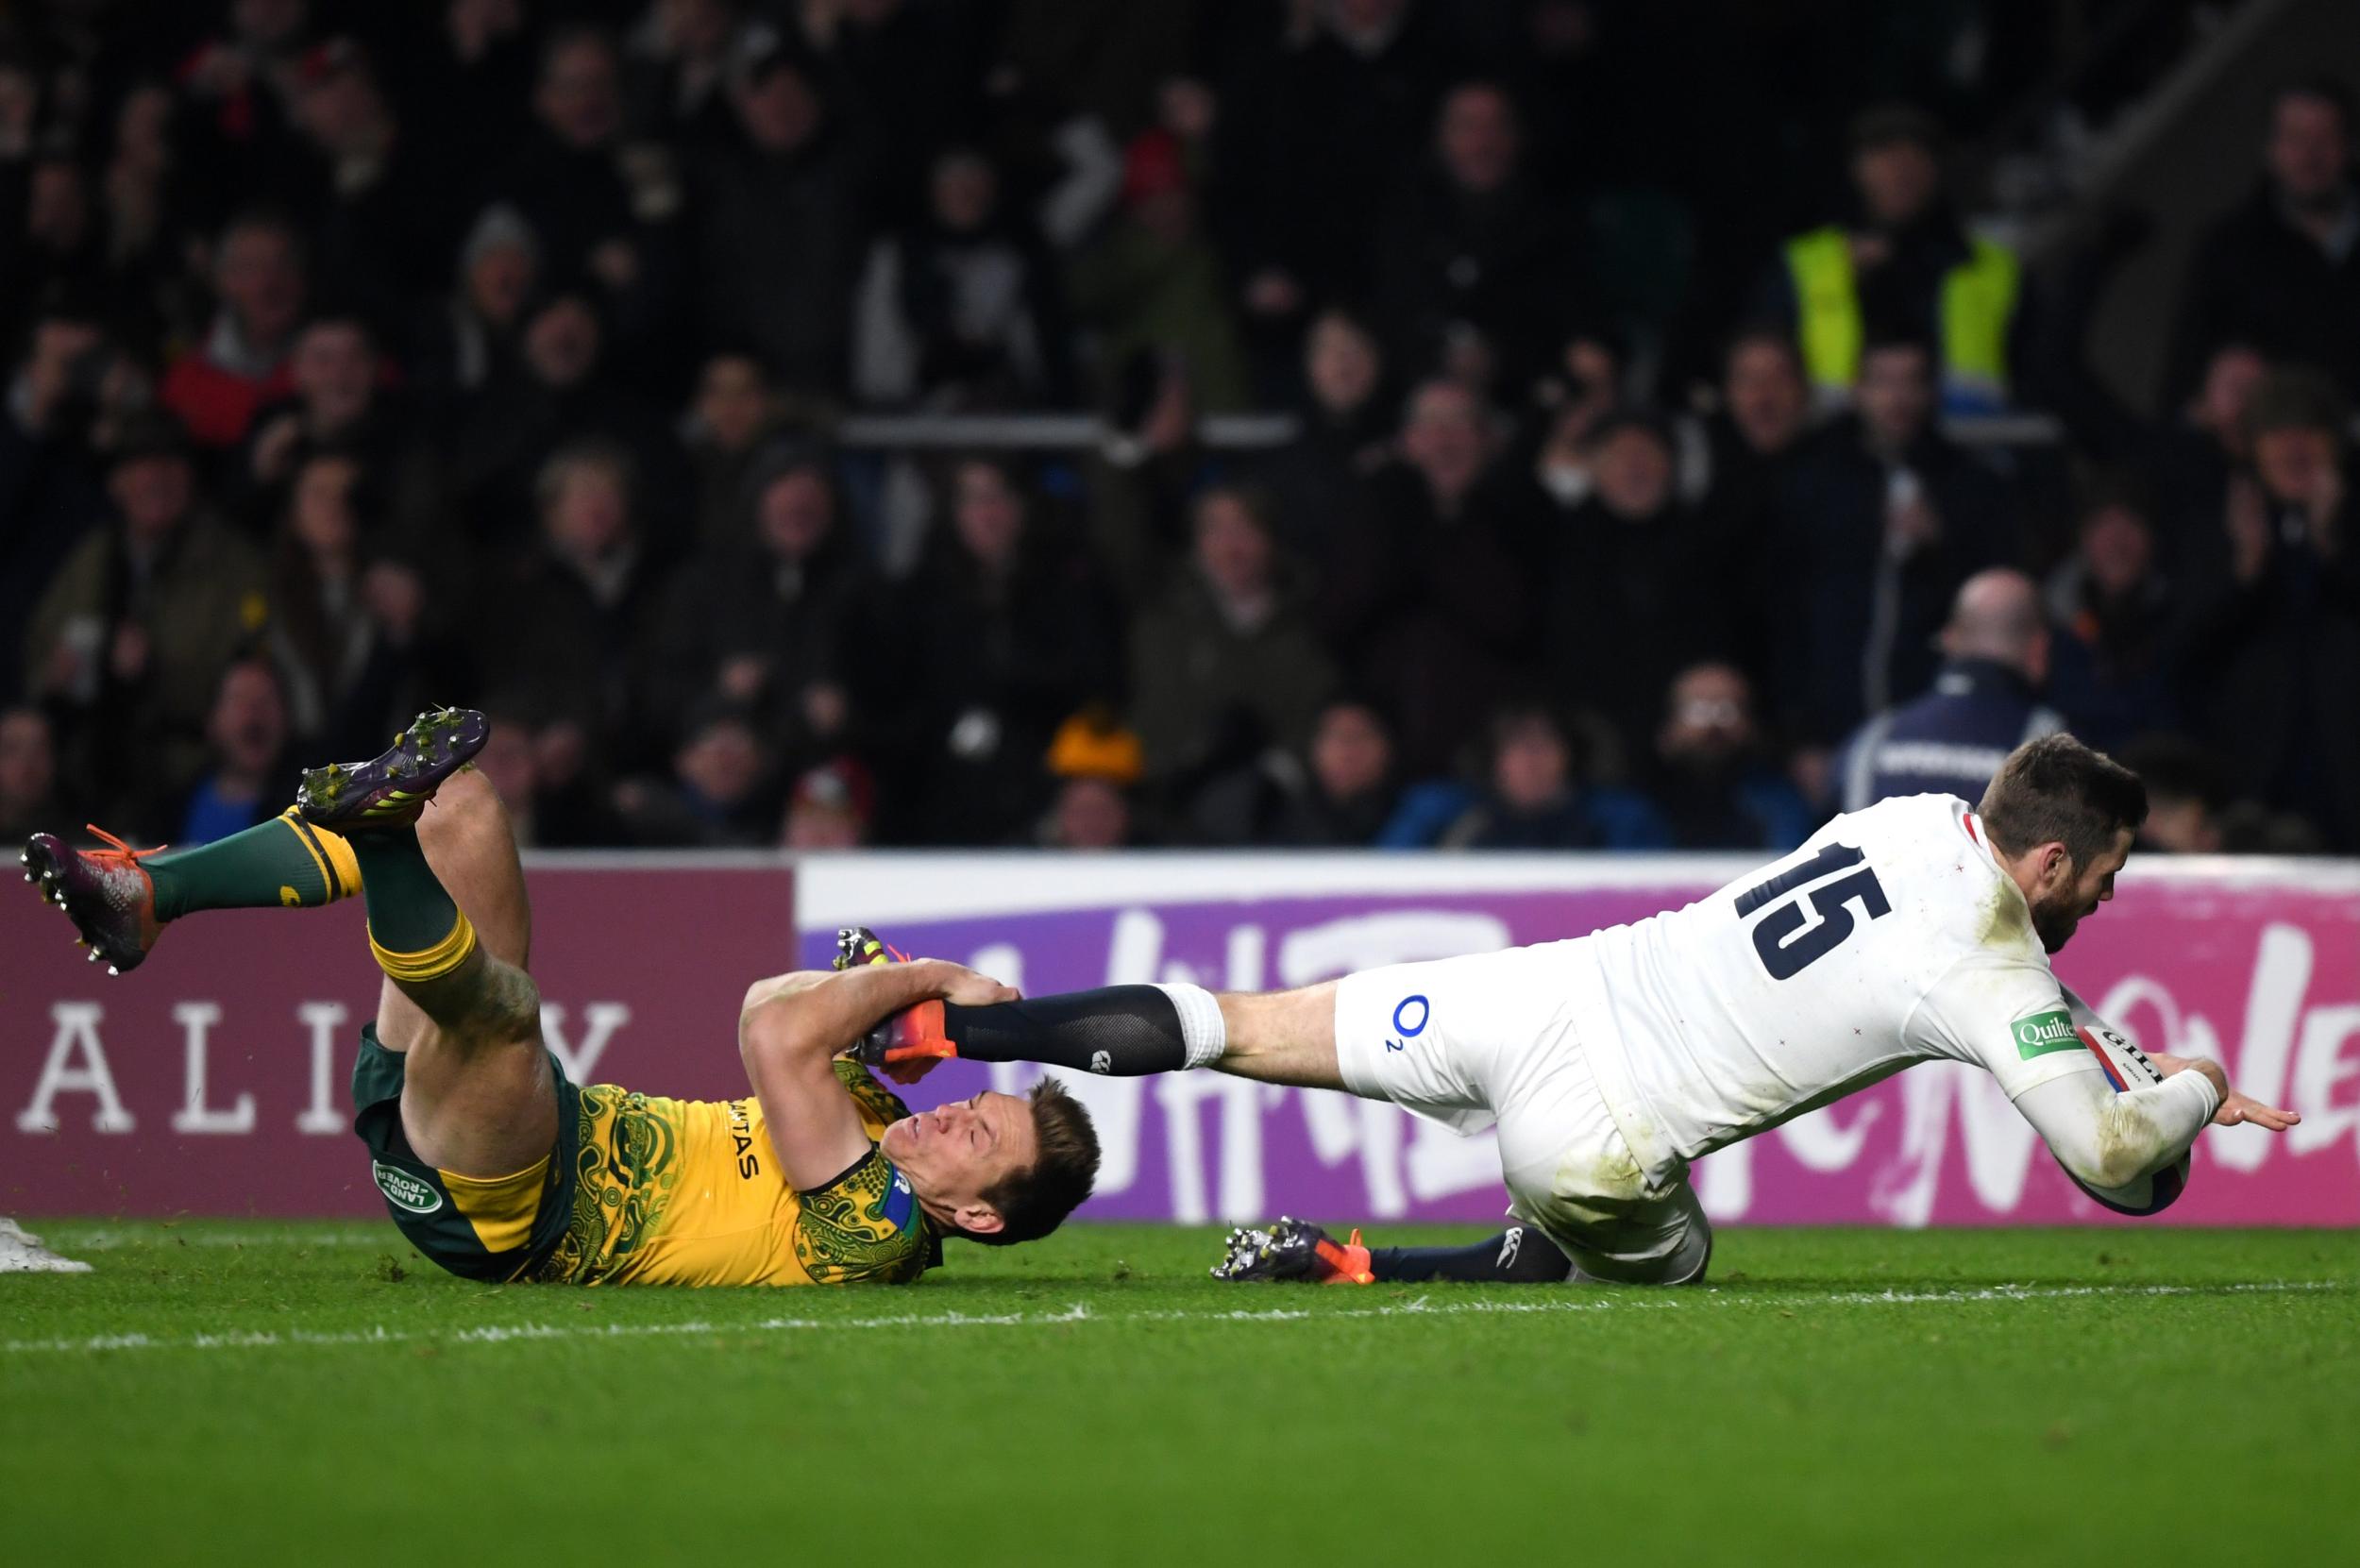 Elliot Daly scores England's second try straight after the break